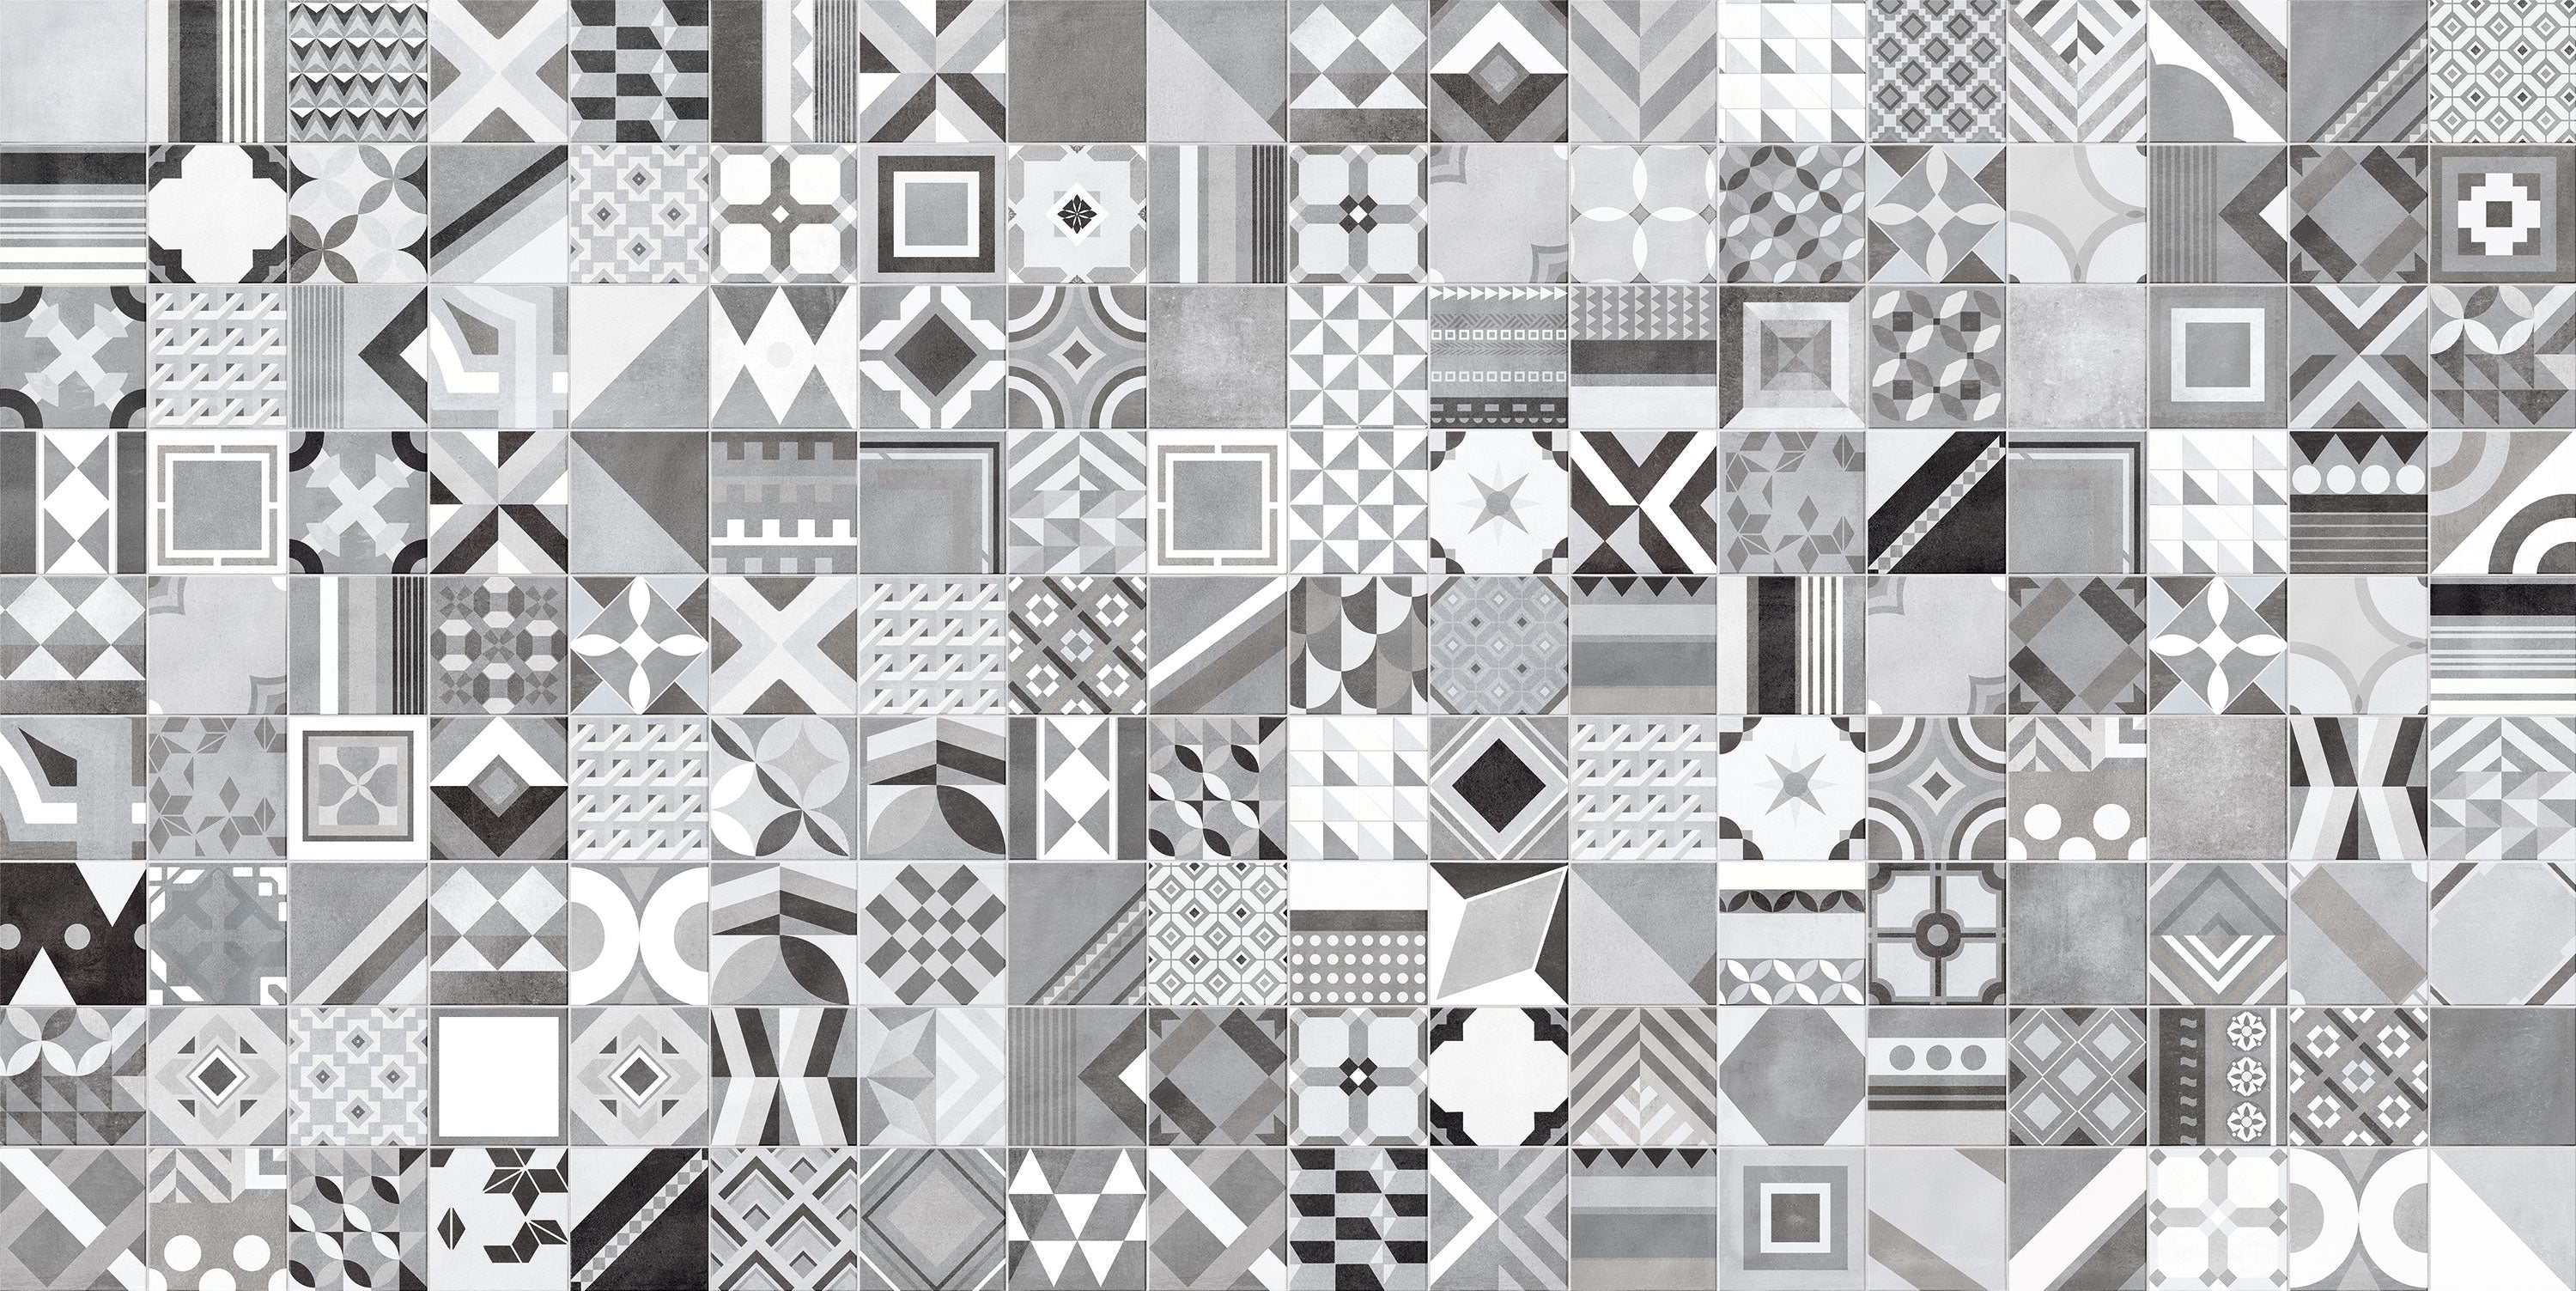 Assorted Portuguese patterned porcelain tiles in various geometric designs and monochromatic shades from Surface Group.